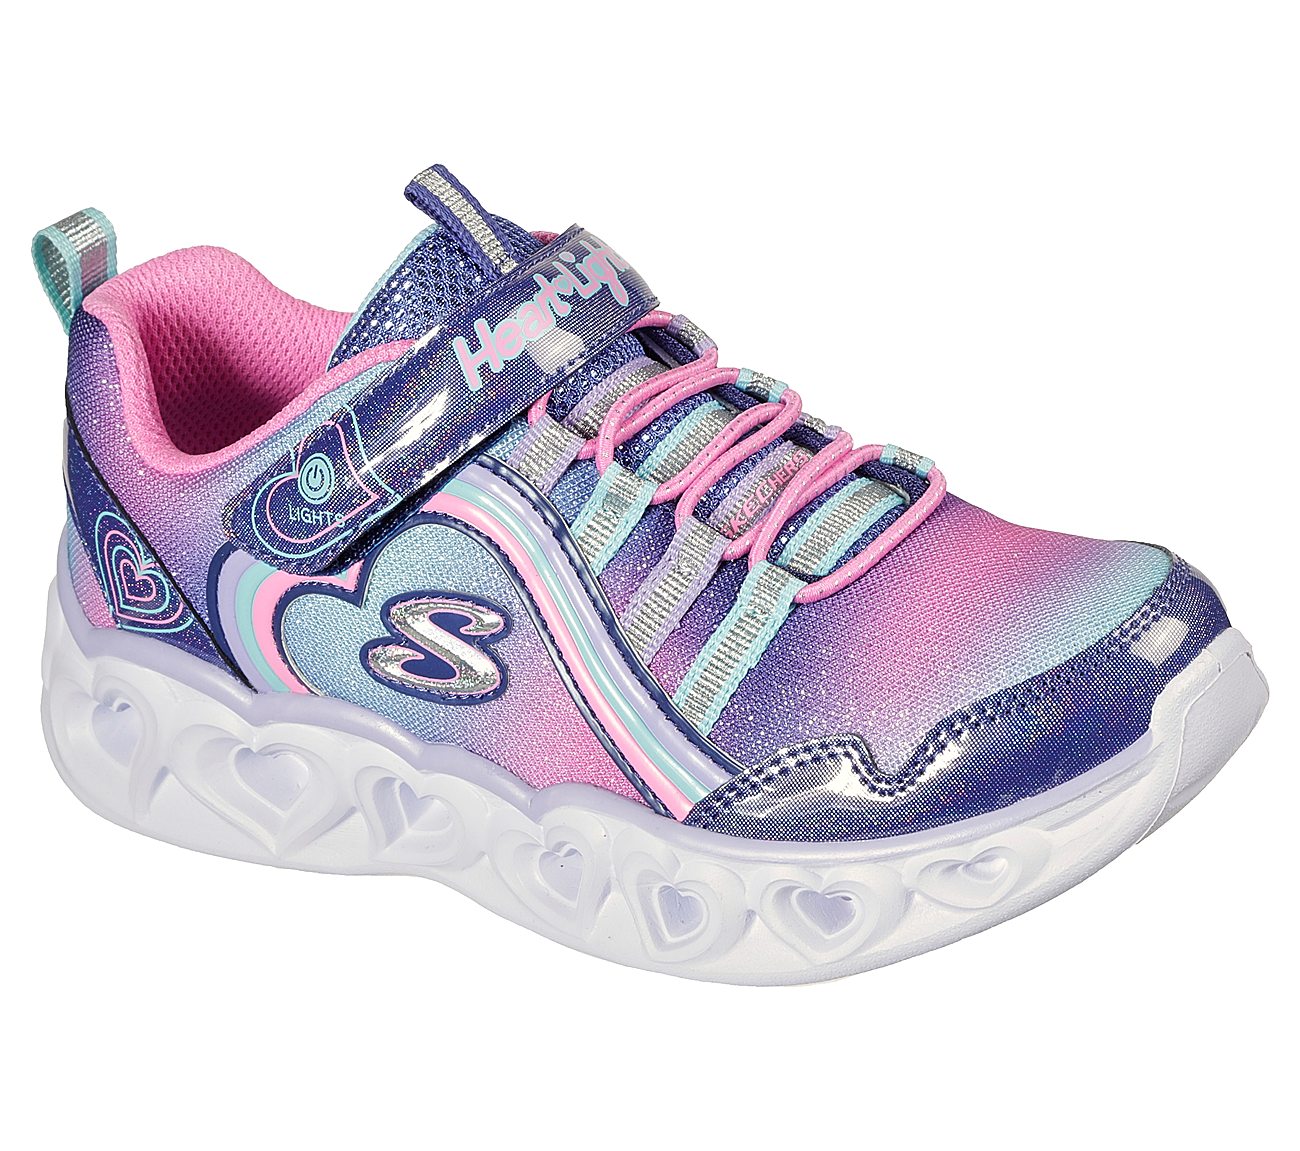 HEART LIGHTS - RAINBOW LUX, NAVY/MULTI Footwear Lateral View